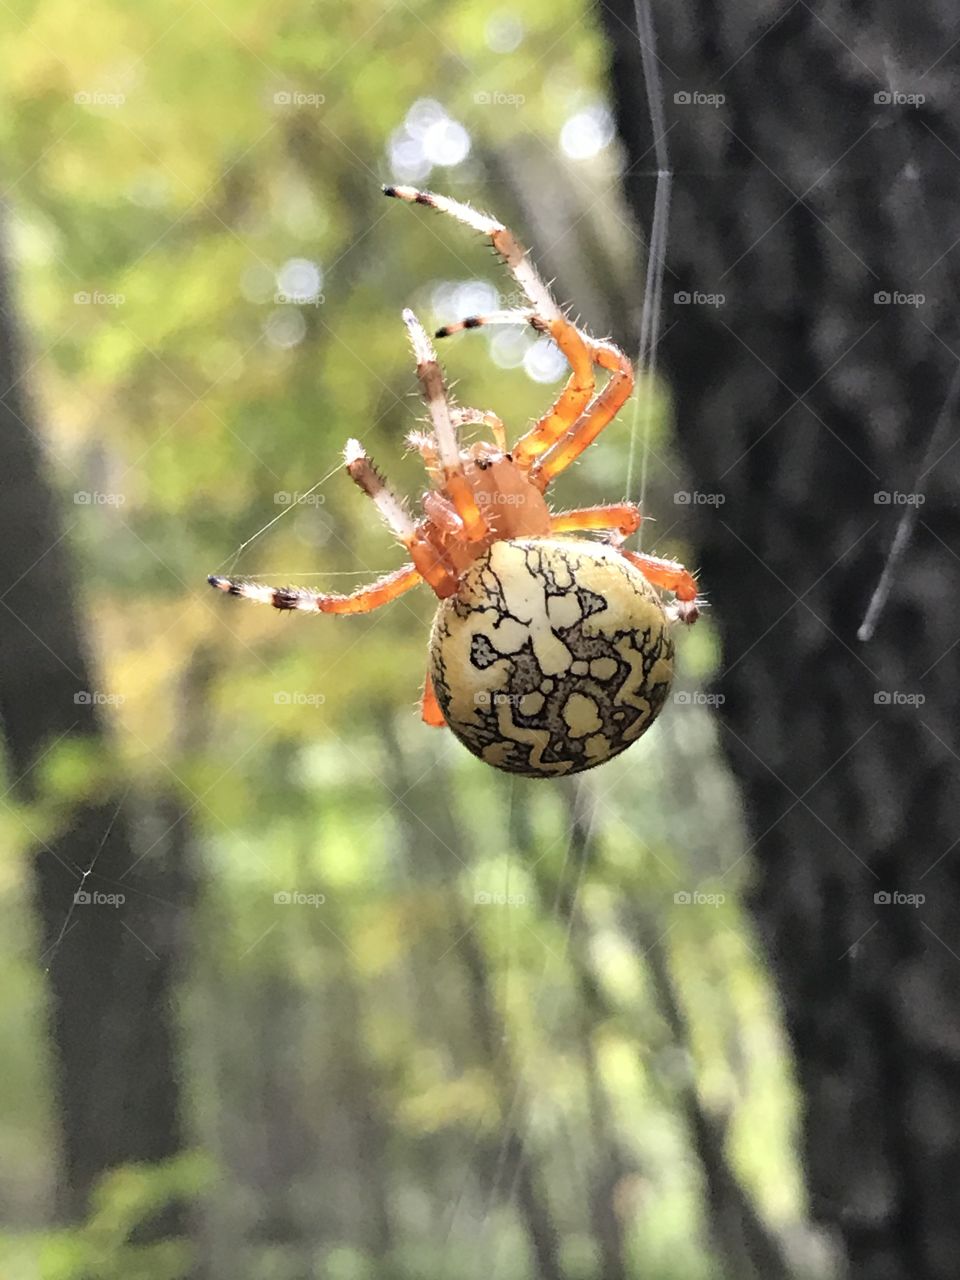 Bright yellow Cone Weaver spider on its web. 